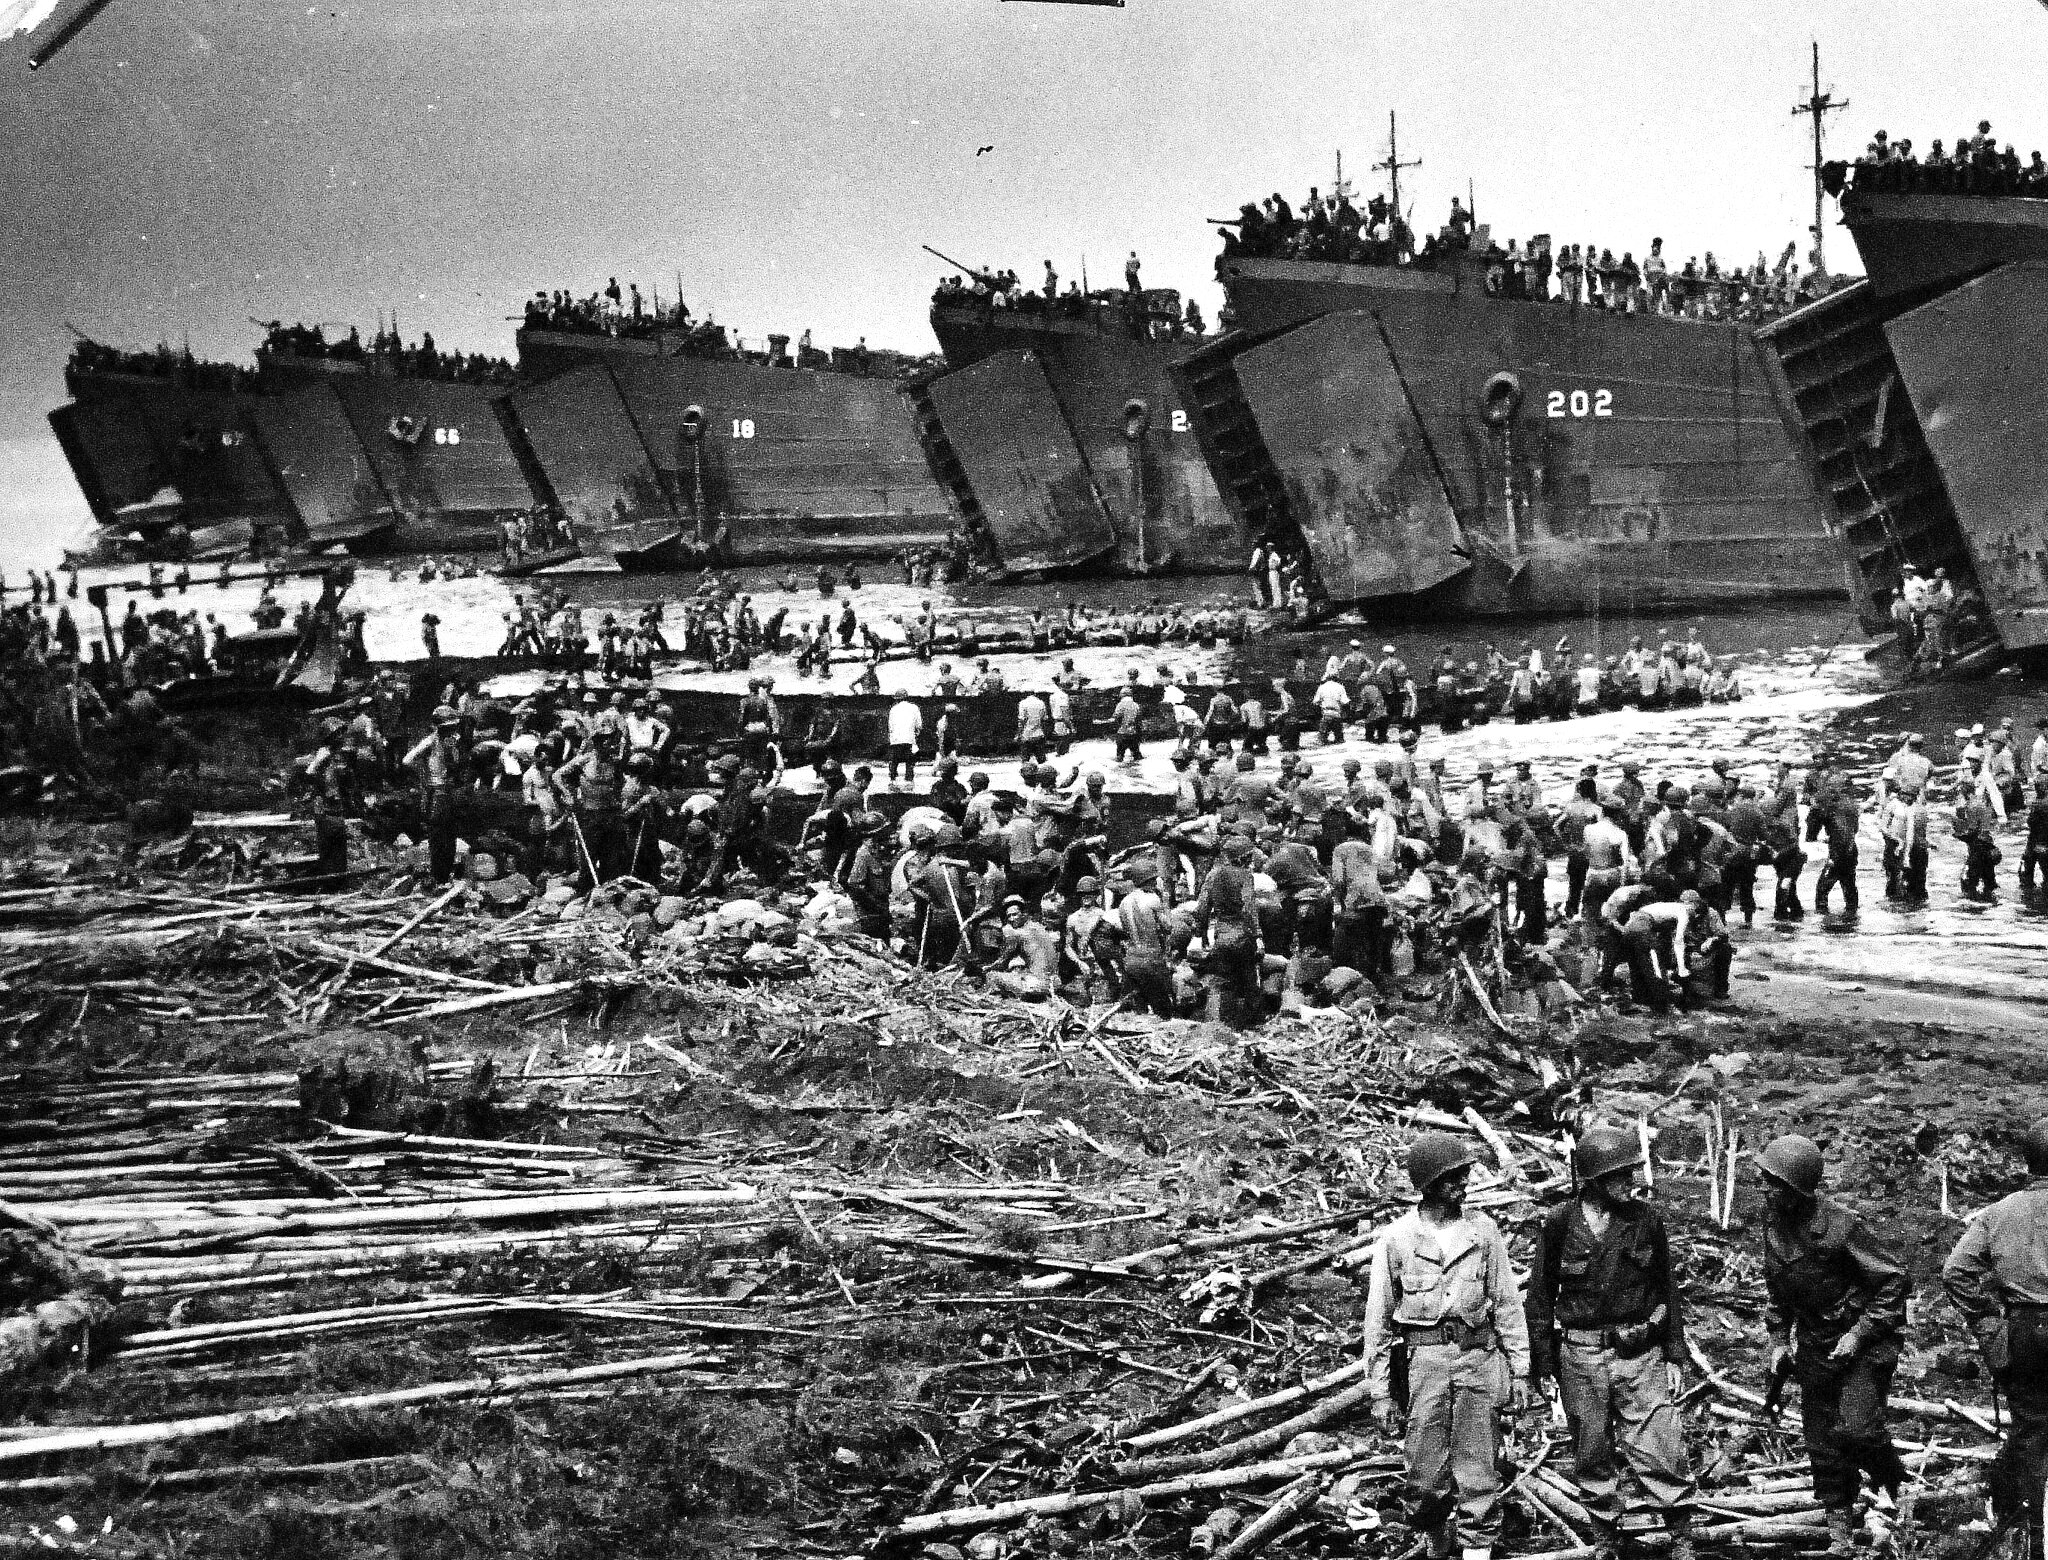 LSTs disembarking troops during the Leyte landings at White Beach, Tacloban, Leyte, Philippines, 20 Oct 1944.